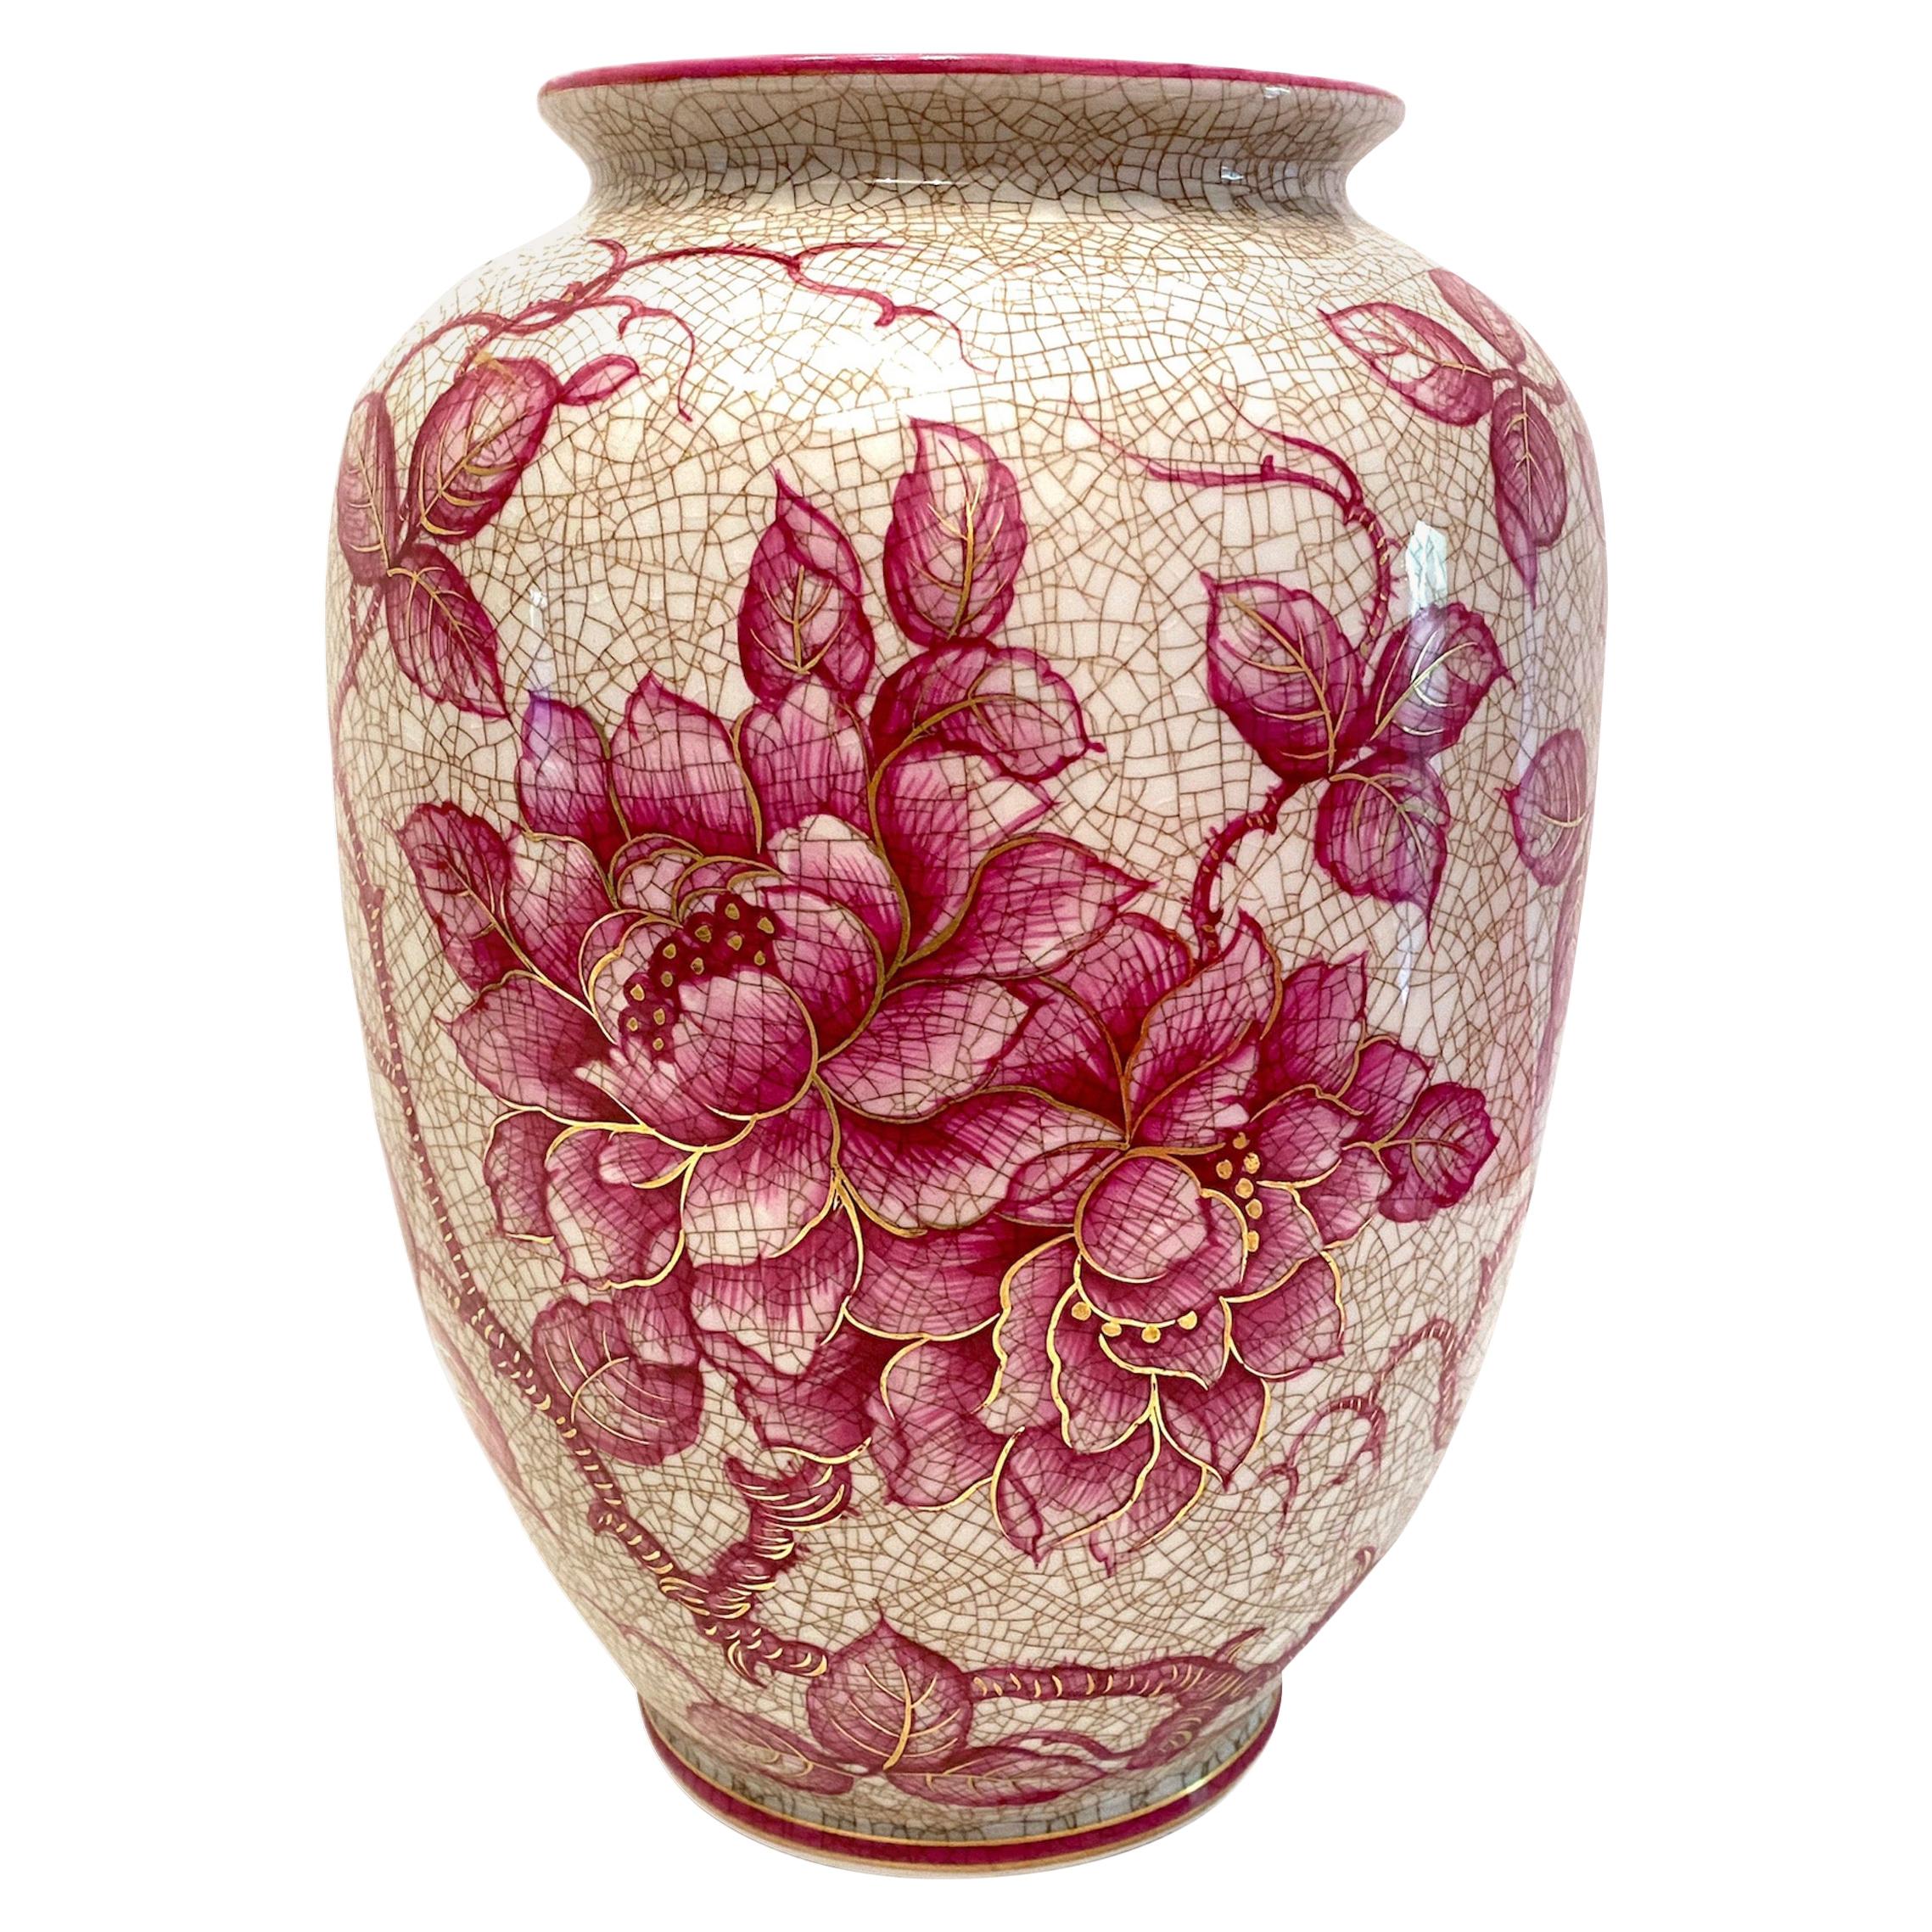 Pink Floral Ceramic Vase by Schaubach, Germany, 1930s